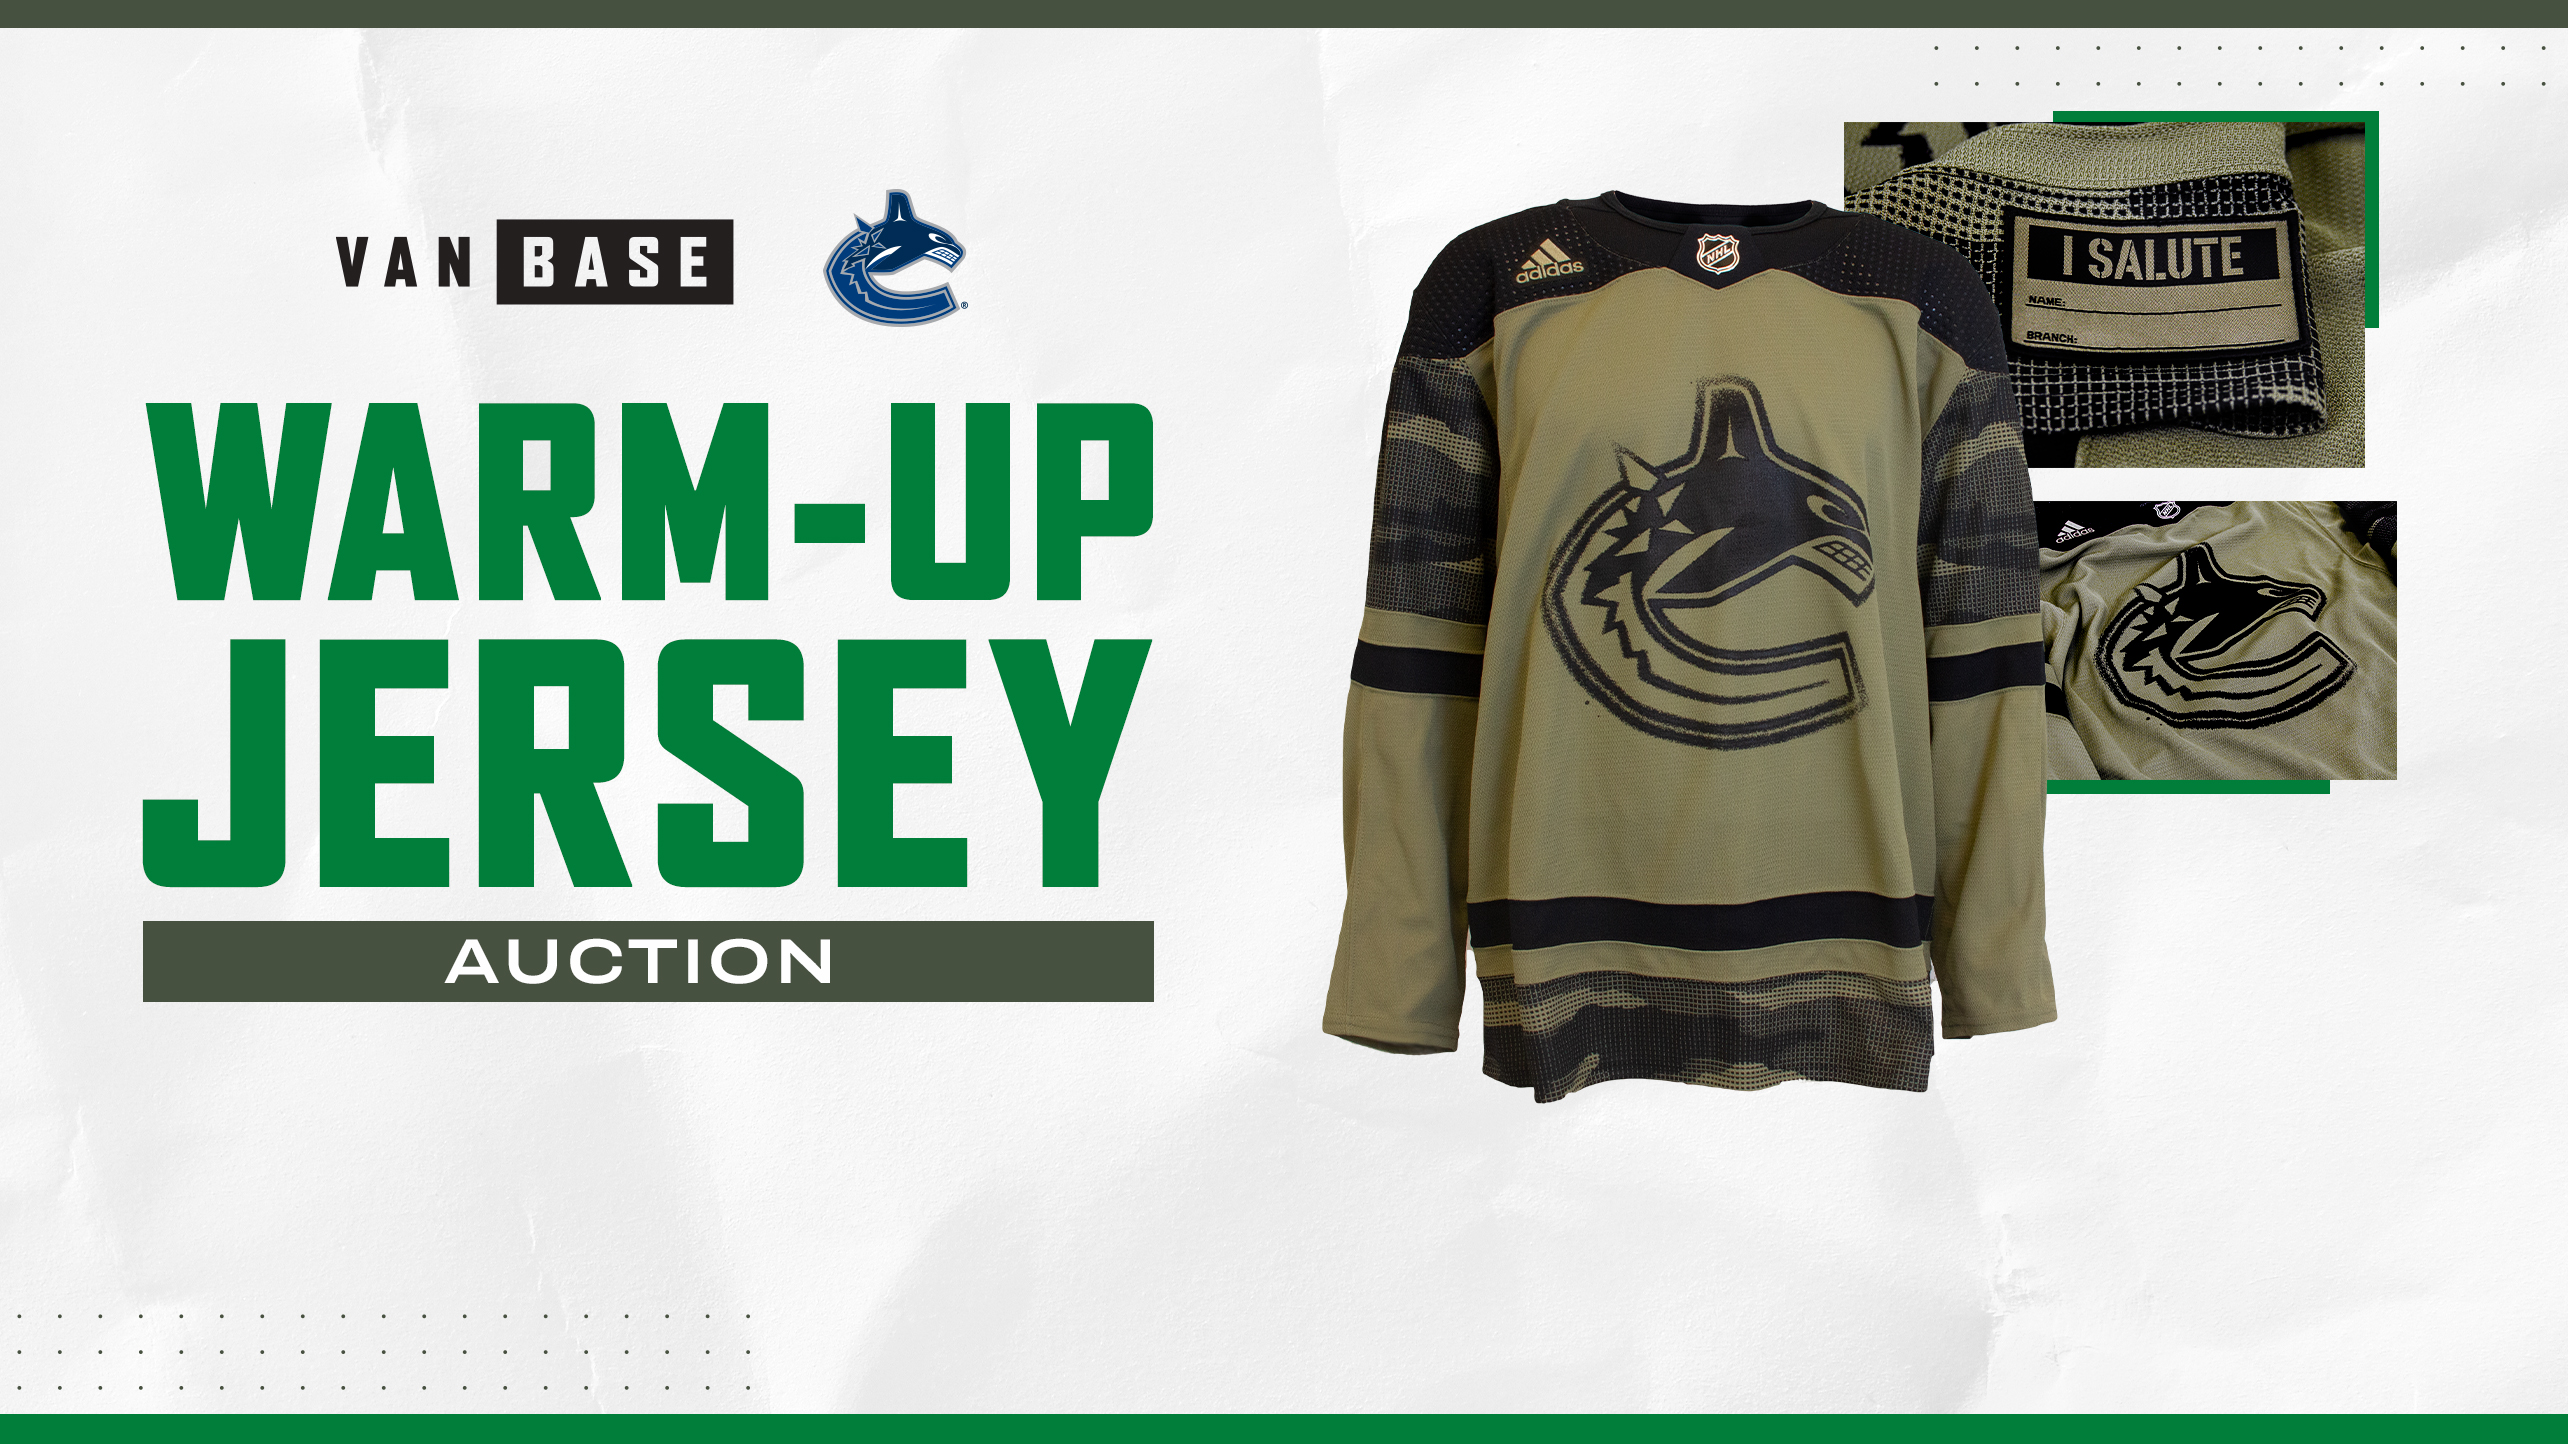 Tonight, the Canucks will wear camo warm-up jerseys for our annual